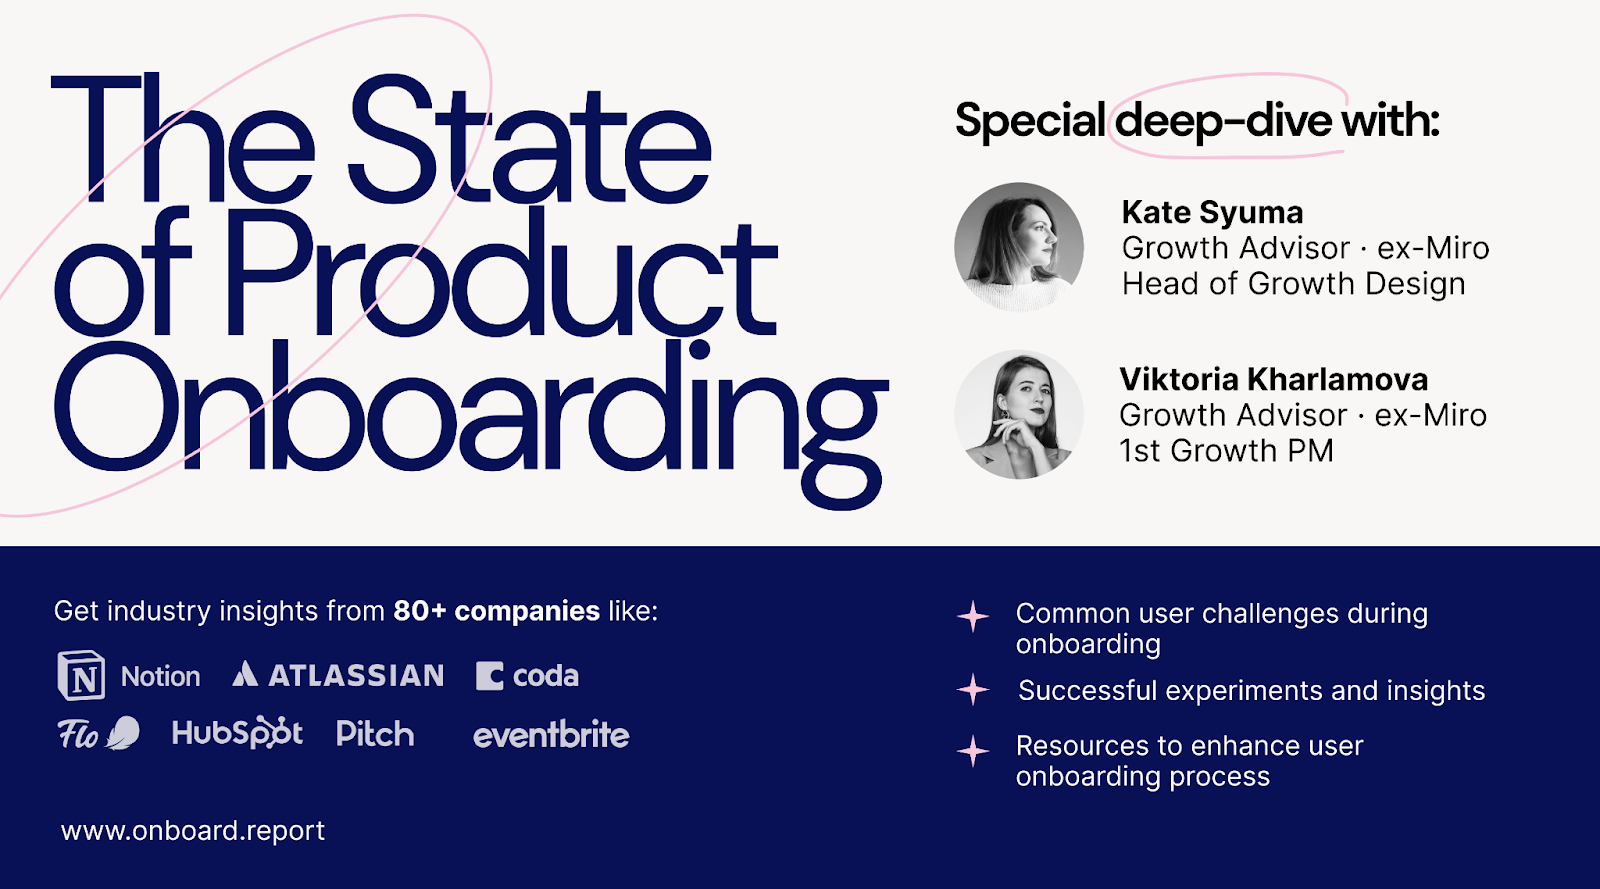 The State of Product Onboarding poster